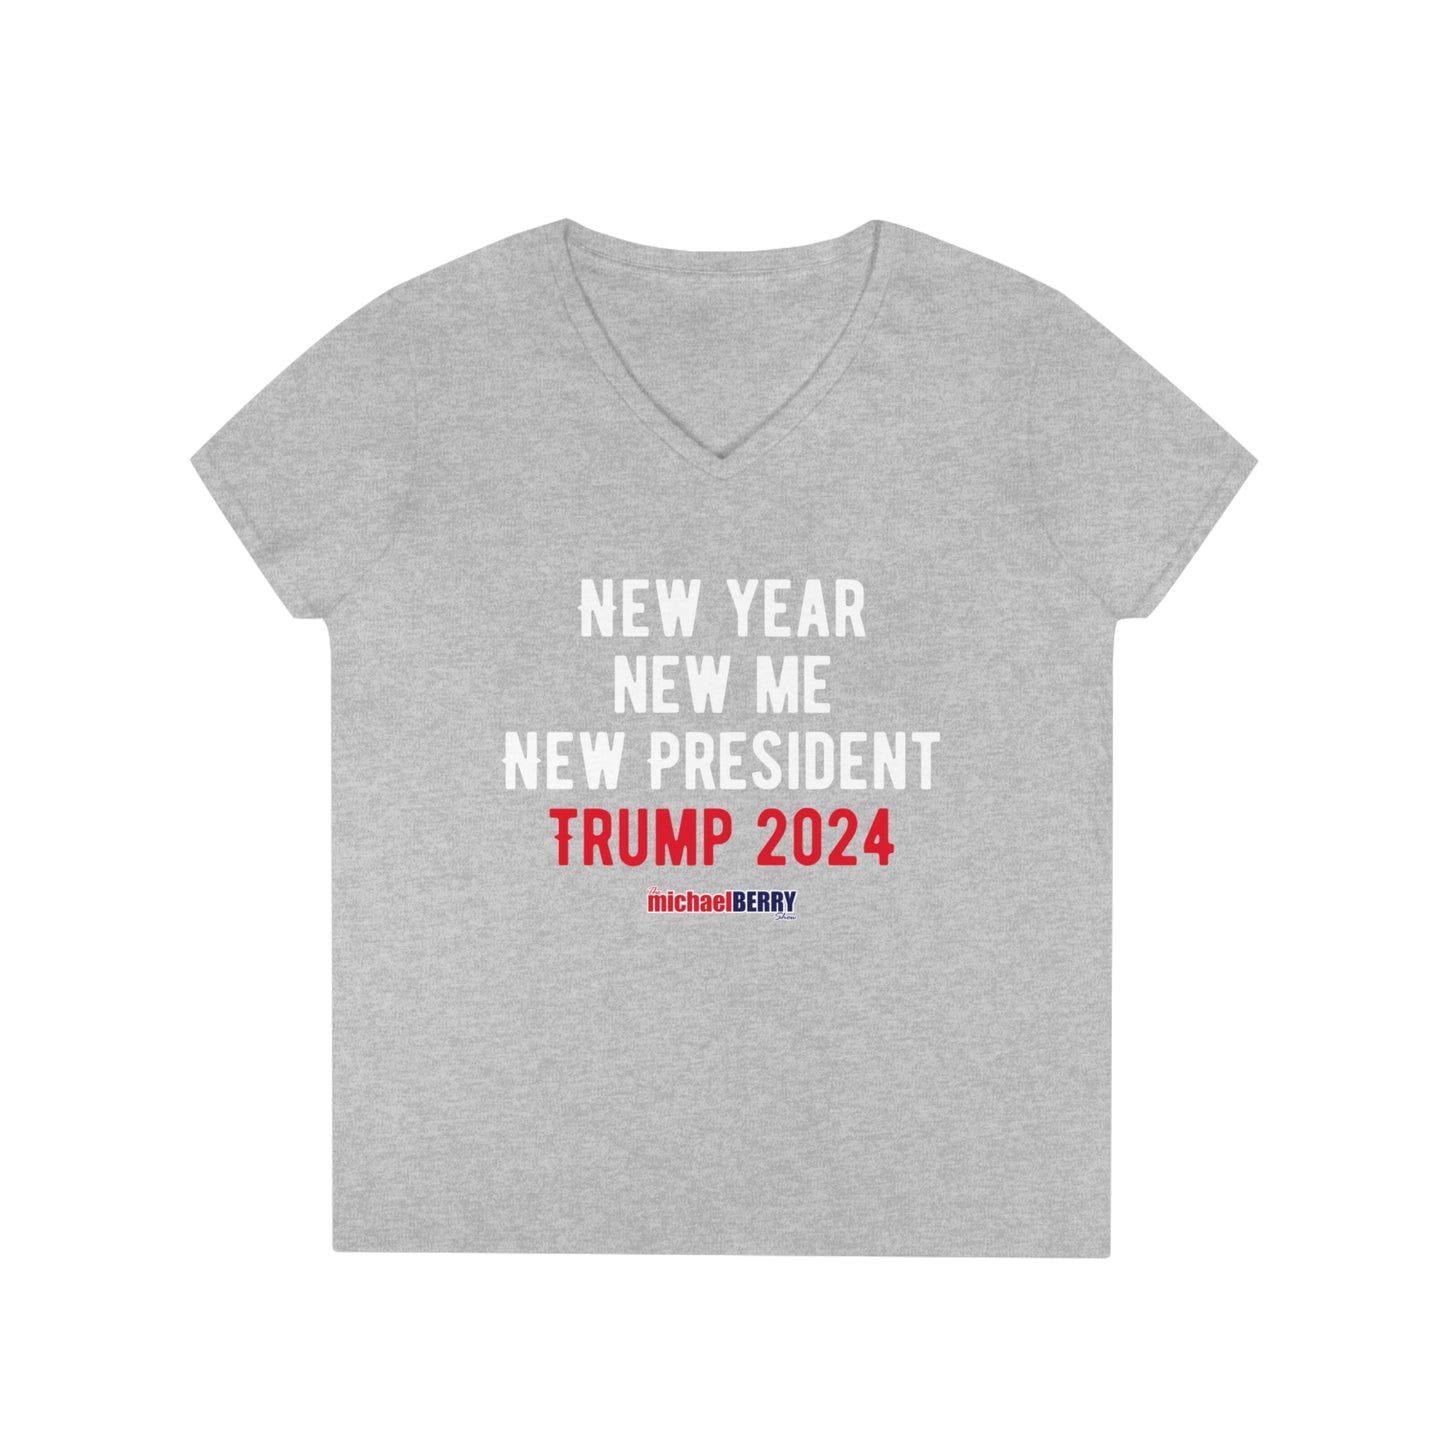 New Year. New Me. New President. Trump 2024 - Ladies' V-Neck Sexy T-Shirt